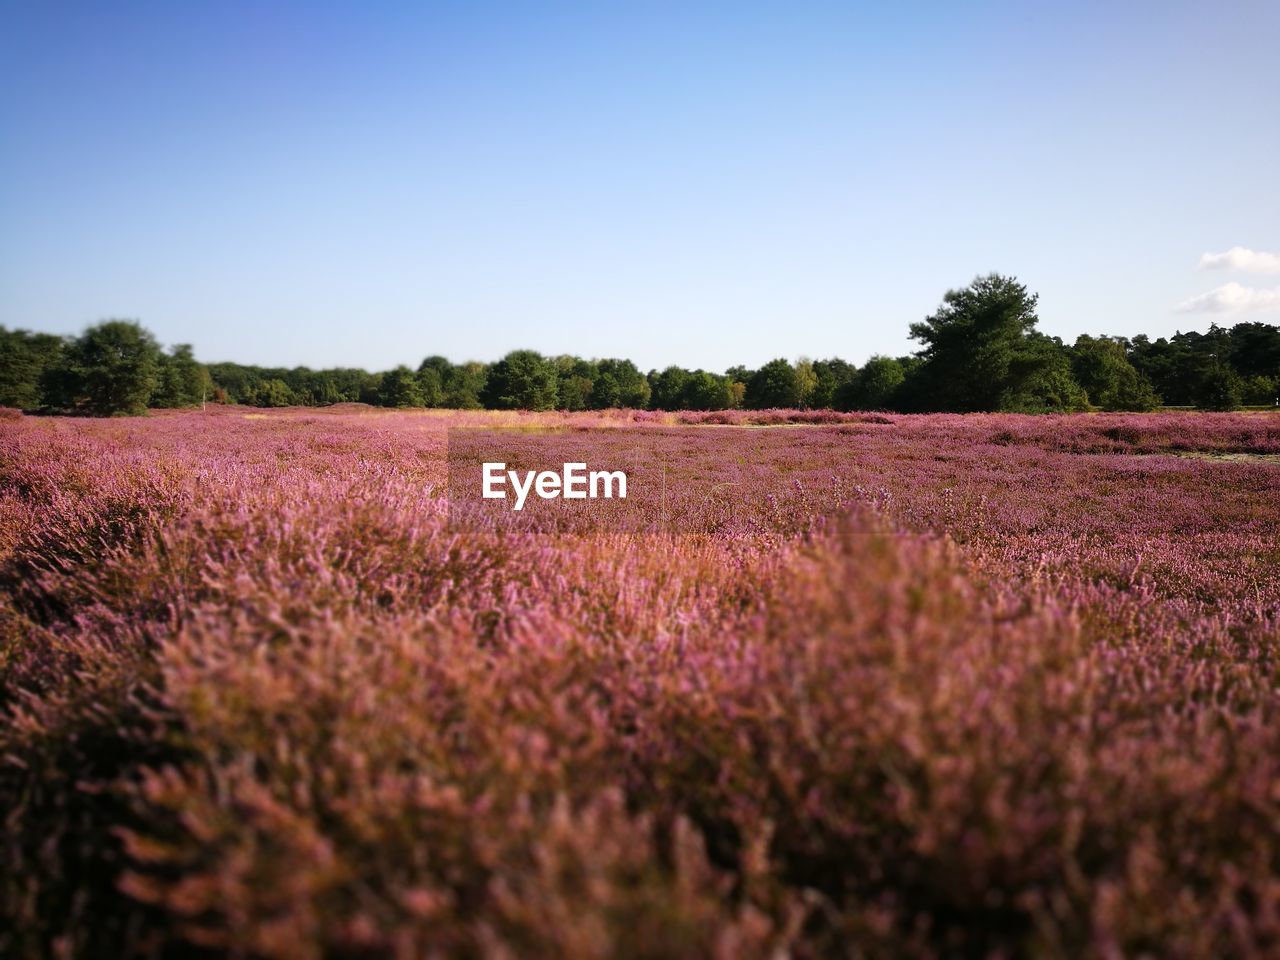 VIEW OF LAVENDER FIELD AGAINST SKY